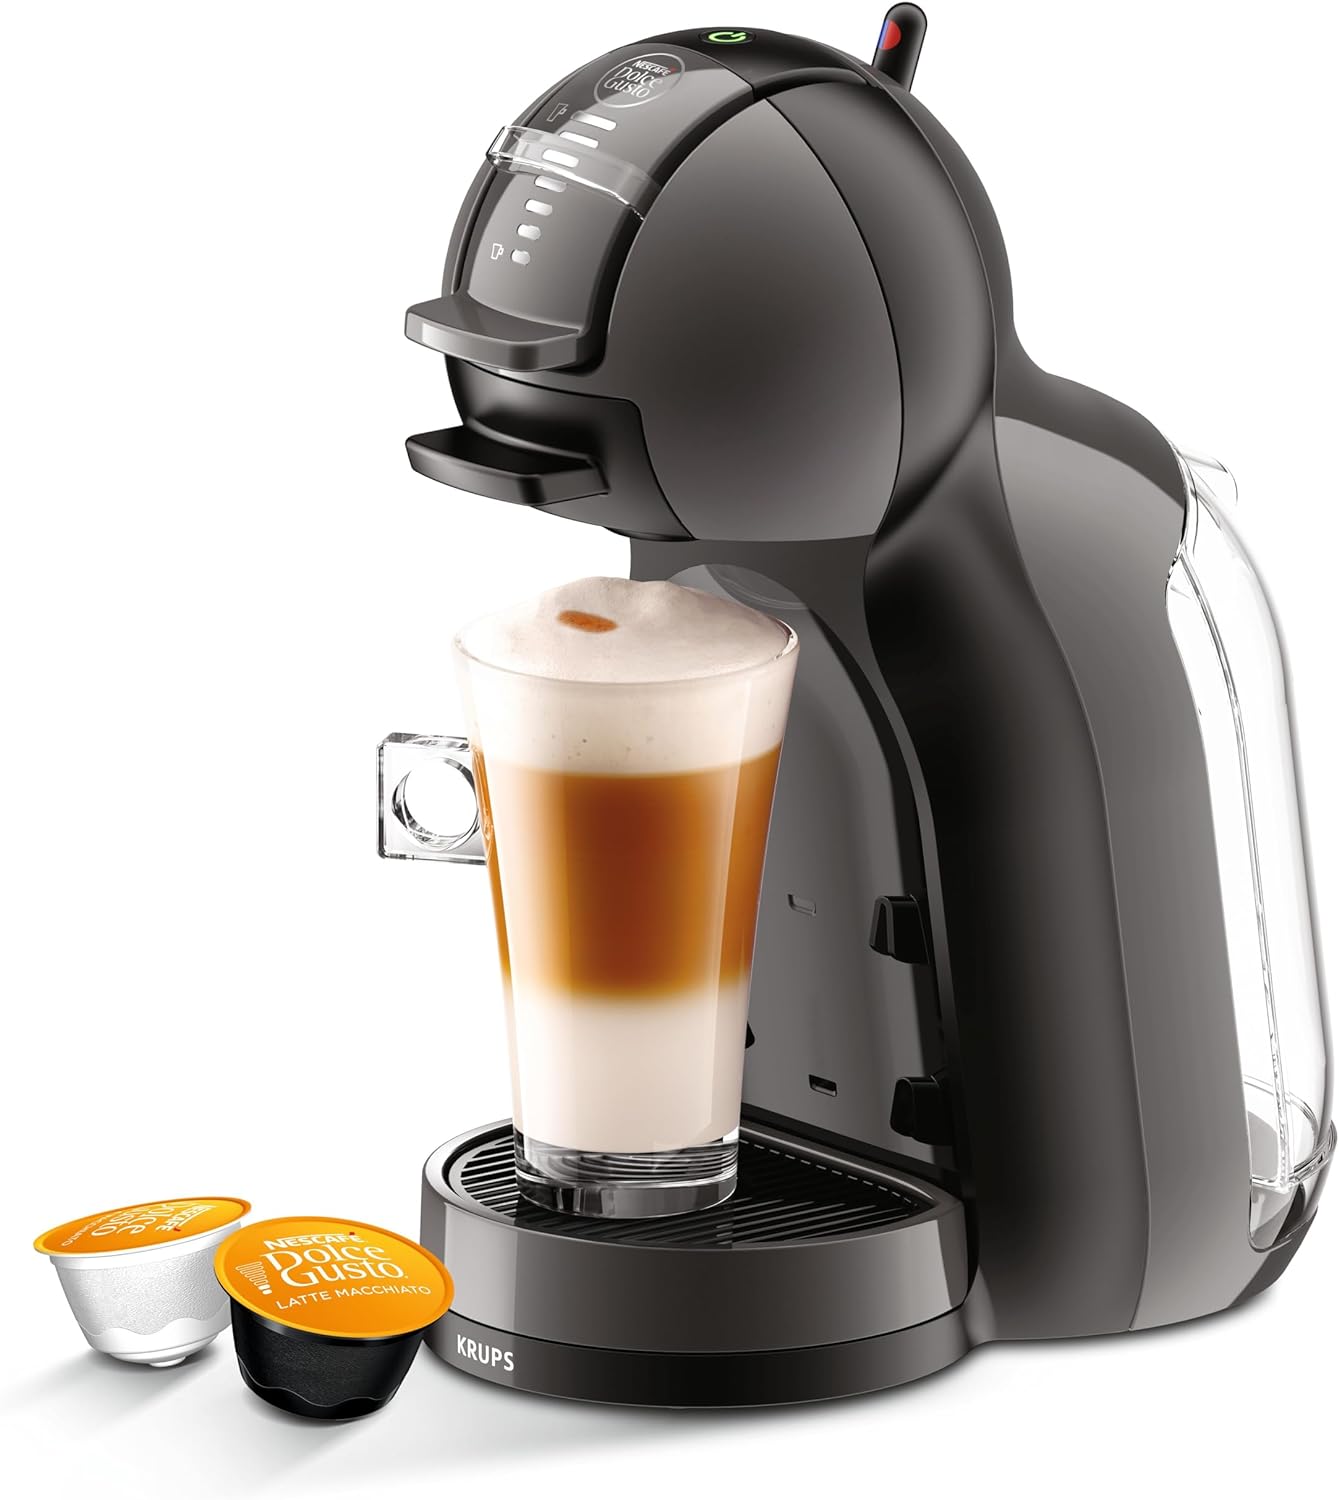 CAFET. KRUPS MINI ME KP1238 DOLCE GUSTO NEGRA